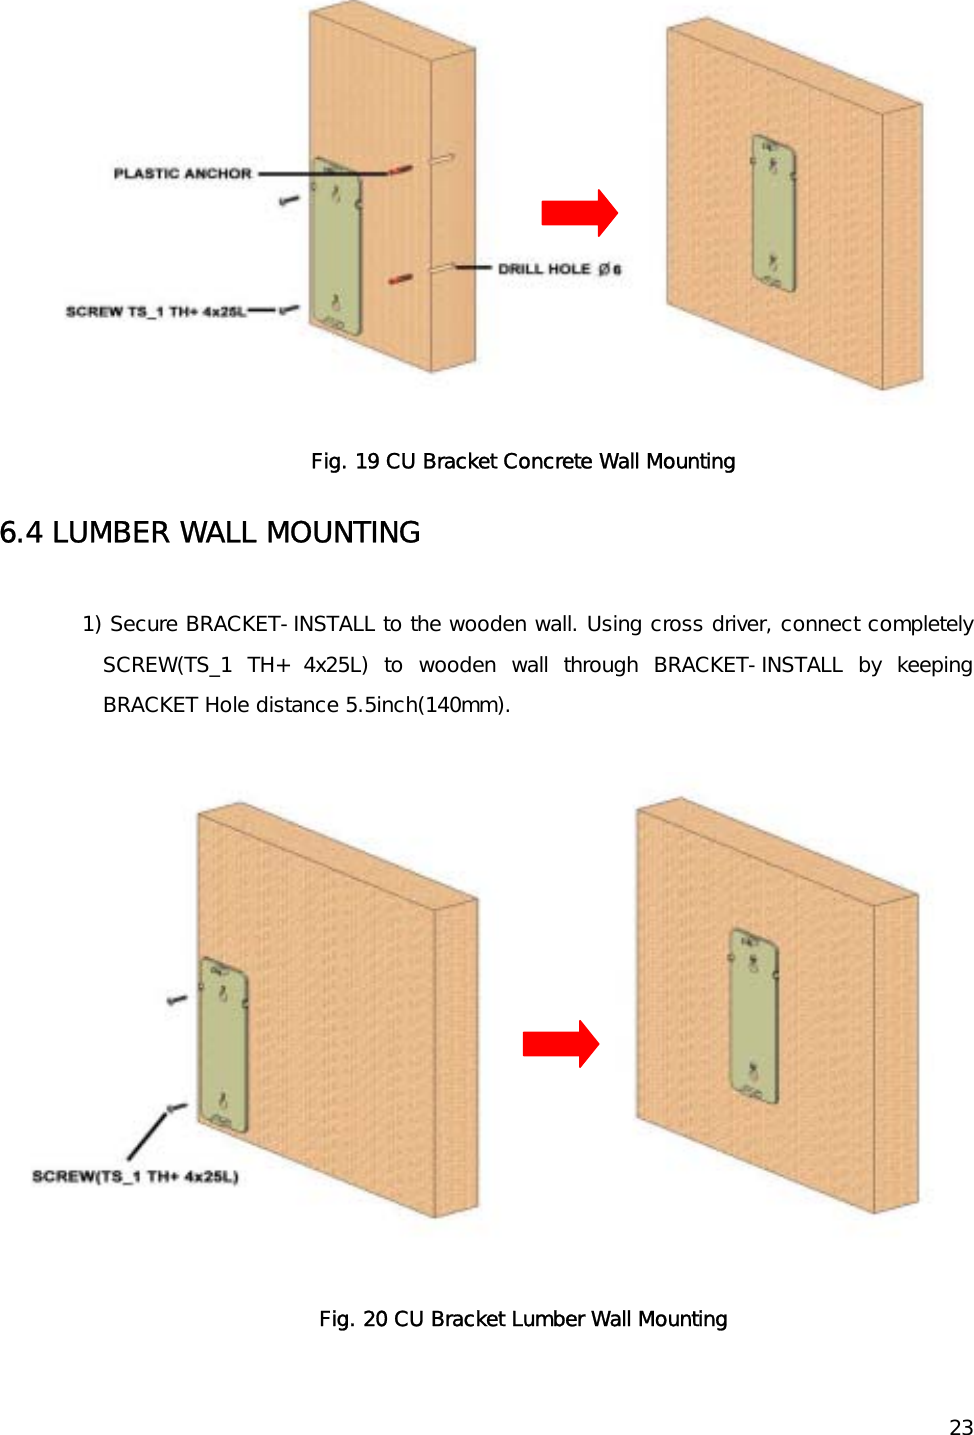    23 Fig. 19 CU Bracket Concrete Wall Mounting 6.4 LUMBER WALL MOUNTING  1) Secure BRACKET-INSTALL to the wooden wall. Using cross driver, connect completely SCREW(TS_1 TH+ 4x25L) to wooden wall through BRACKET-INSTALL by keeping BRACKET Hole distance 5.5inch(140mm).   Fig. 20 CU Bracket Lumber Wall Mounting 